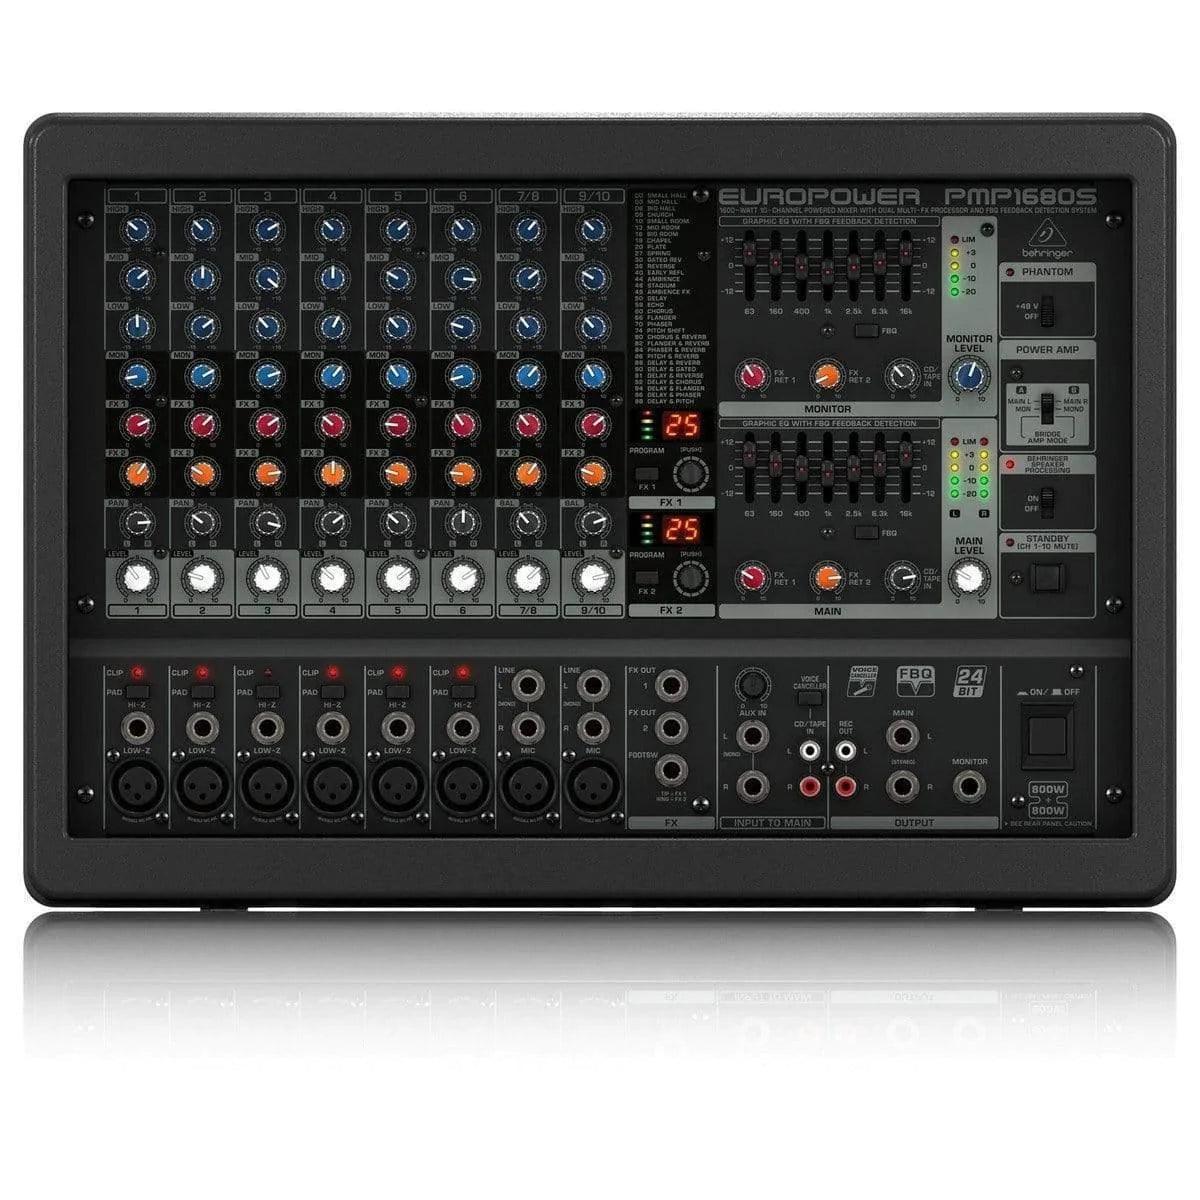 Behringer Europower PMP2000D Powered Mixer in UAE & GCC at